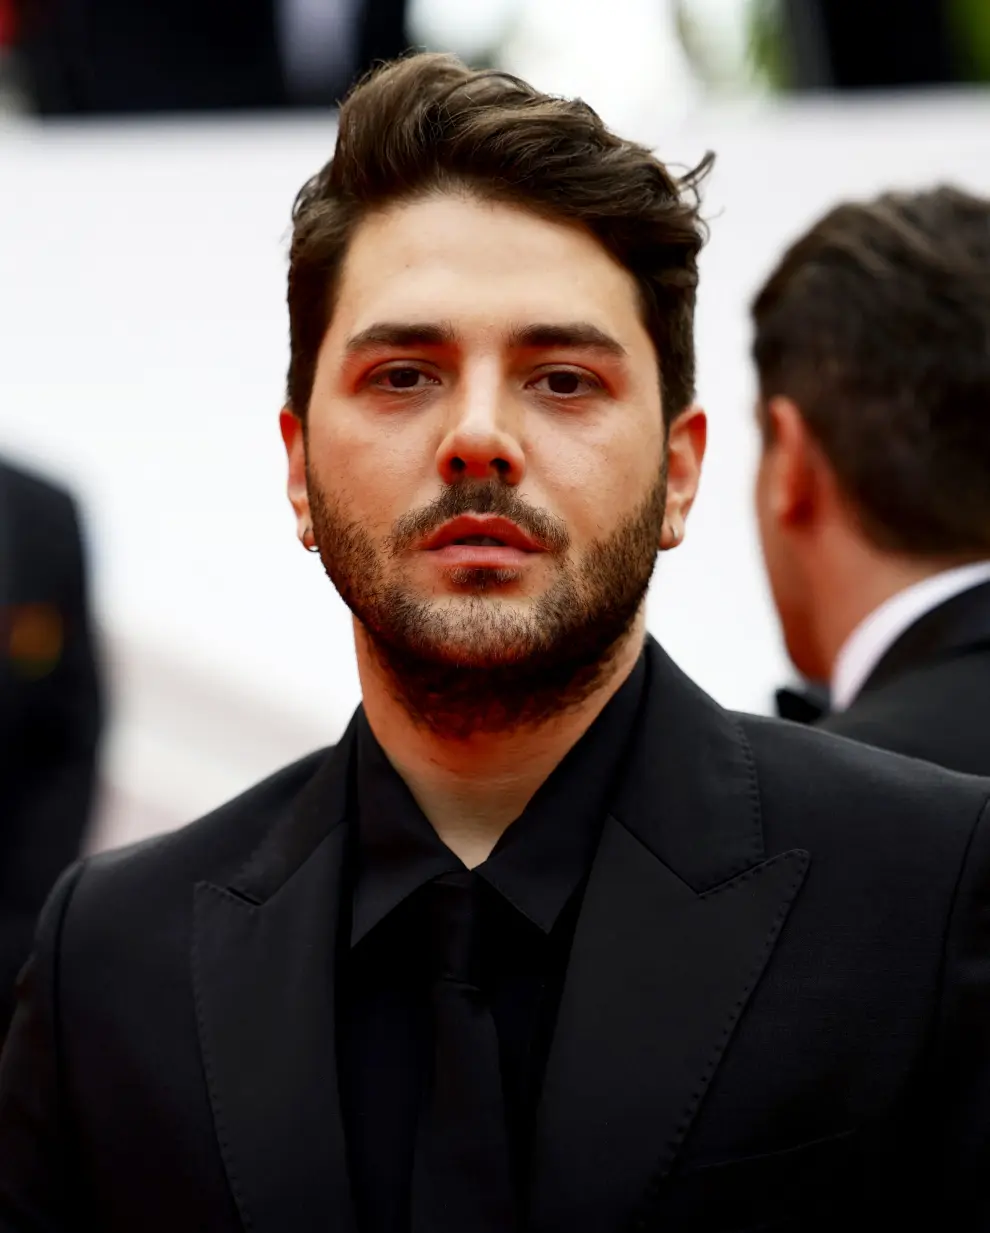 The 76th Cannes Film Festival - Opening ceremony and screening of the film "Jeanne du Barry" Out of competition - Red Carpet arrivals - Cannes, France, May 16, 2023. Xavier Dolan poses. REUTERS/Eric Gaillard FILMFESTIVAL-CANNES/OPENING RED CARPET